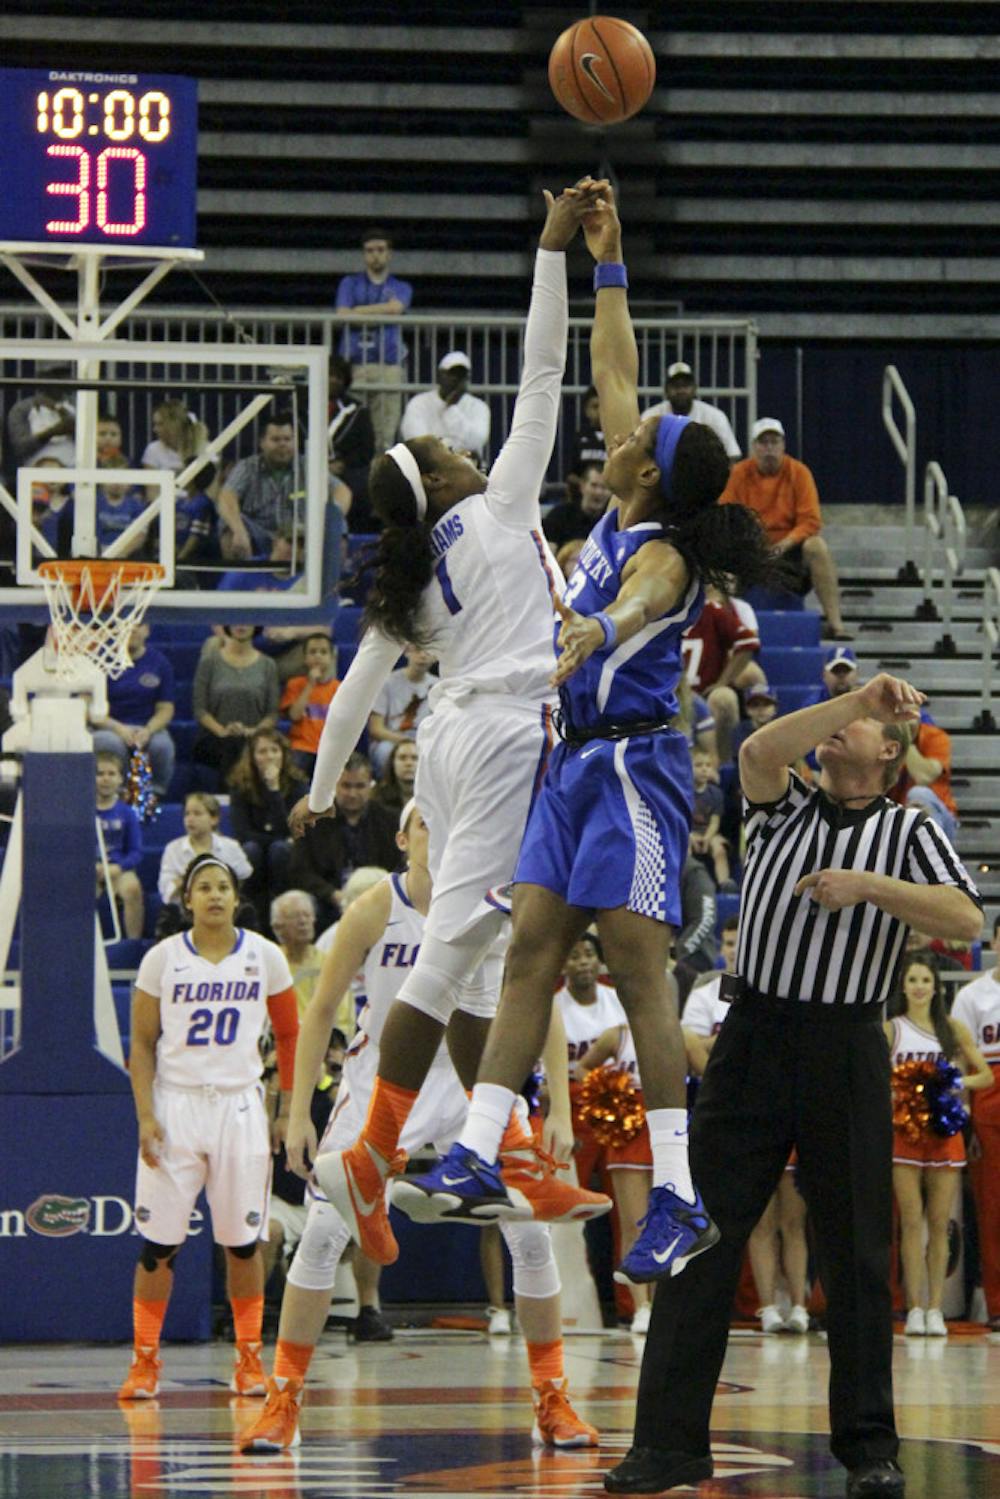 <p>Ronni Williams jumps during the tipoff of Florida's 85-79 win over Kentucky on Jan. 31, 2016, in the O'Connell Center.</p>